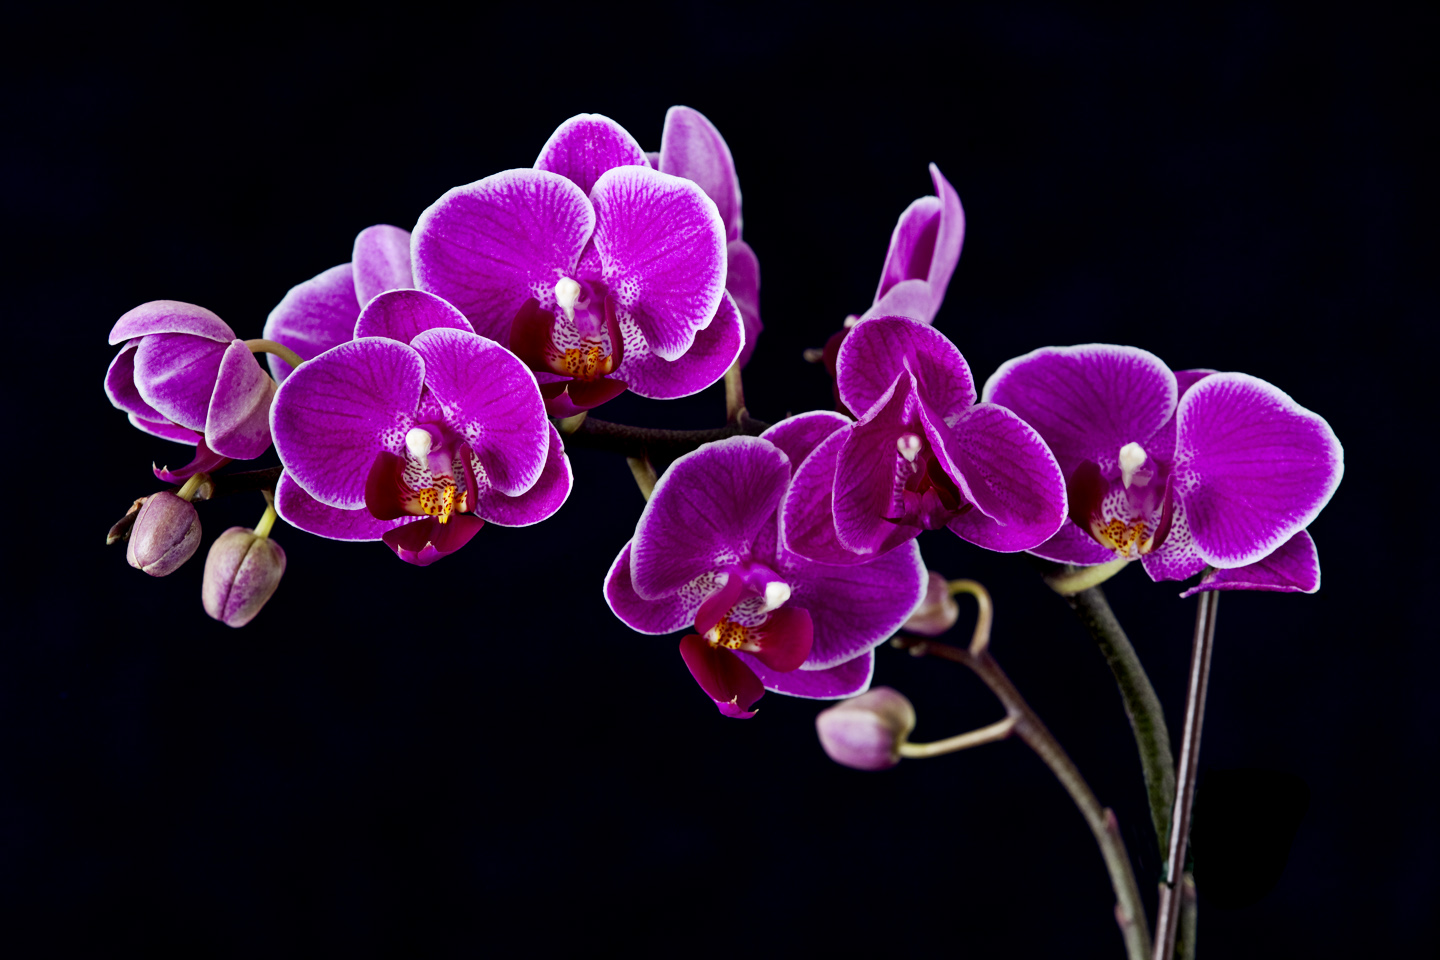 black piece of foamcore makes a great clean background these orchids ...